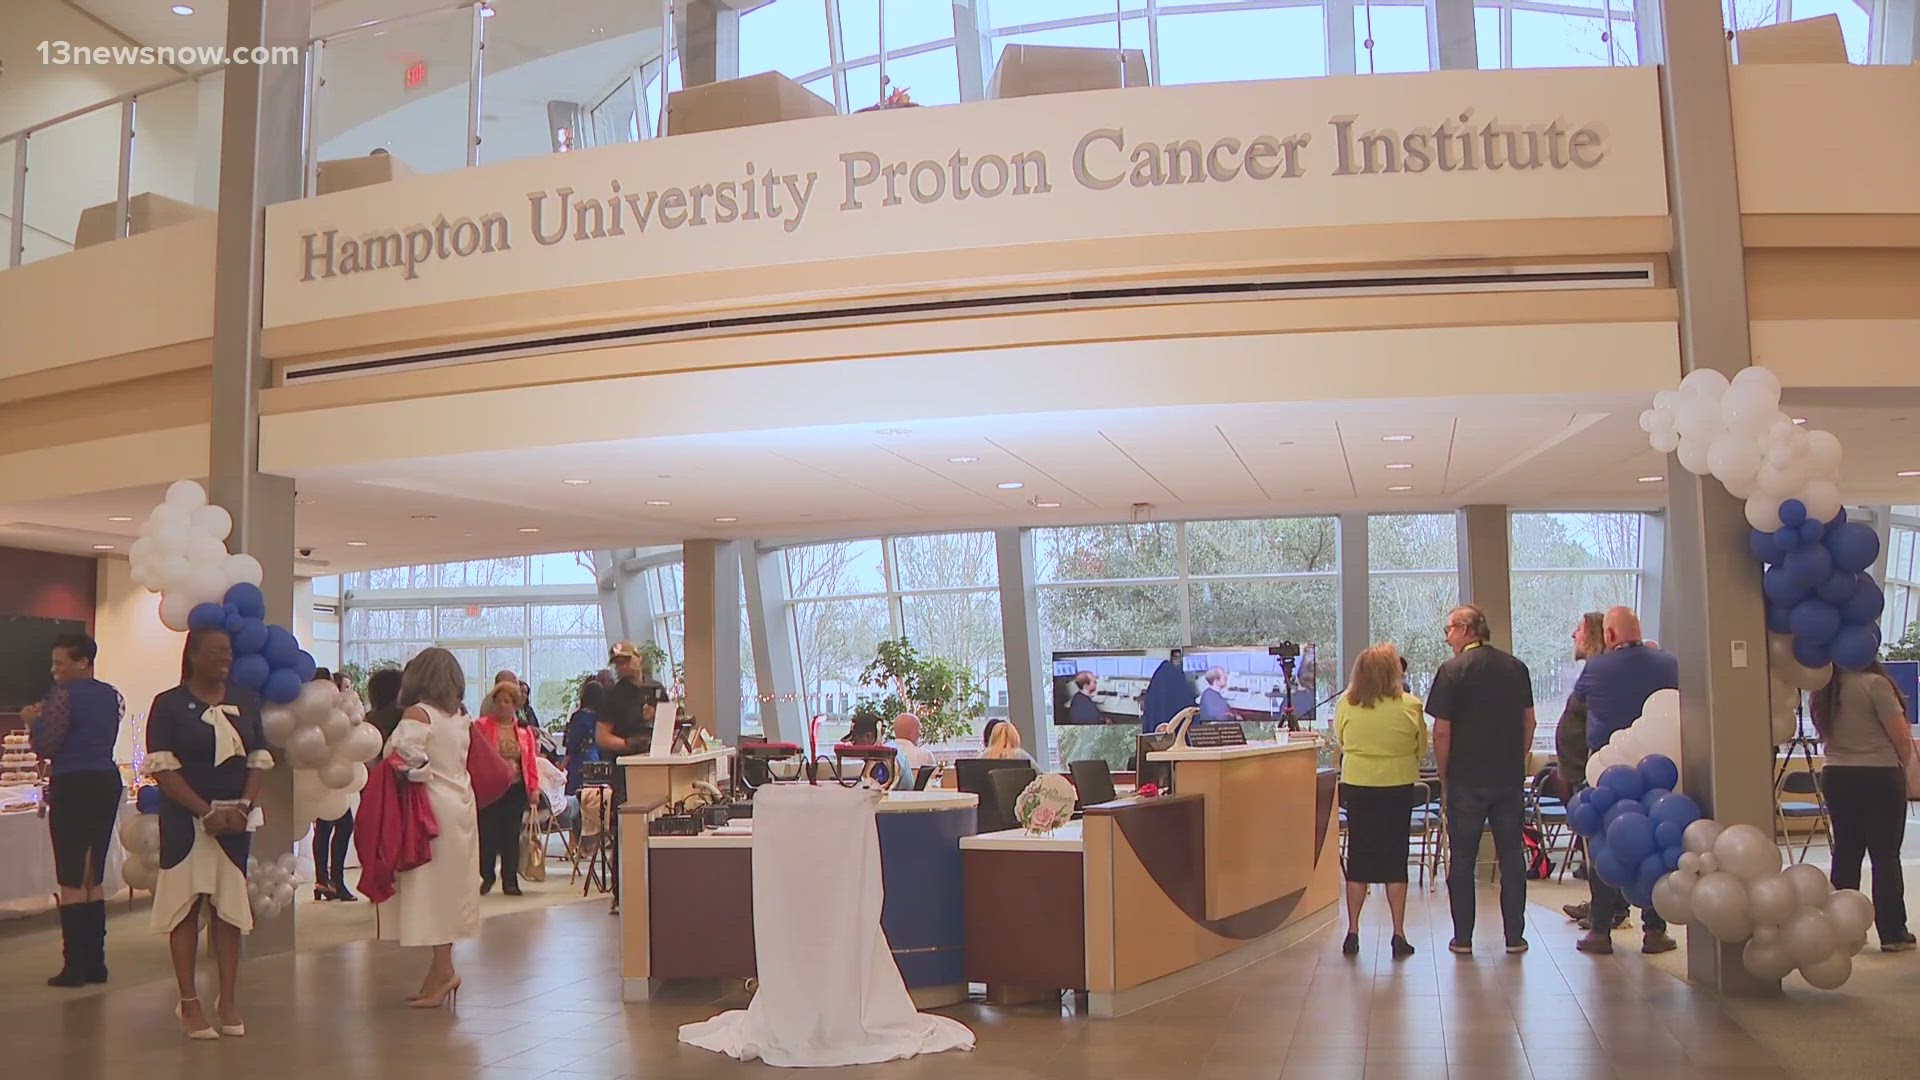 The Hampton University Proton Therapy Institute is starting a new chapter.